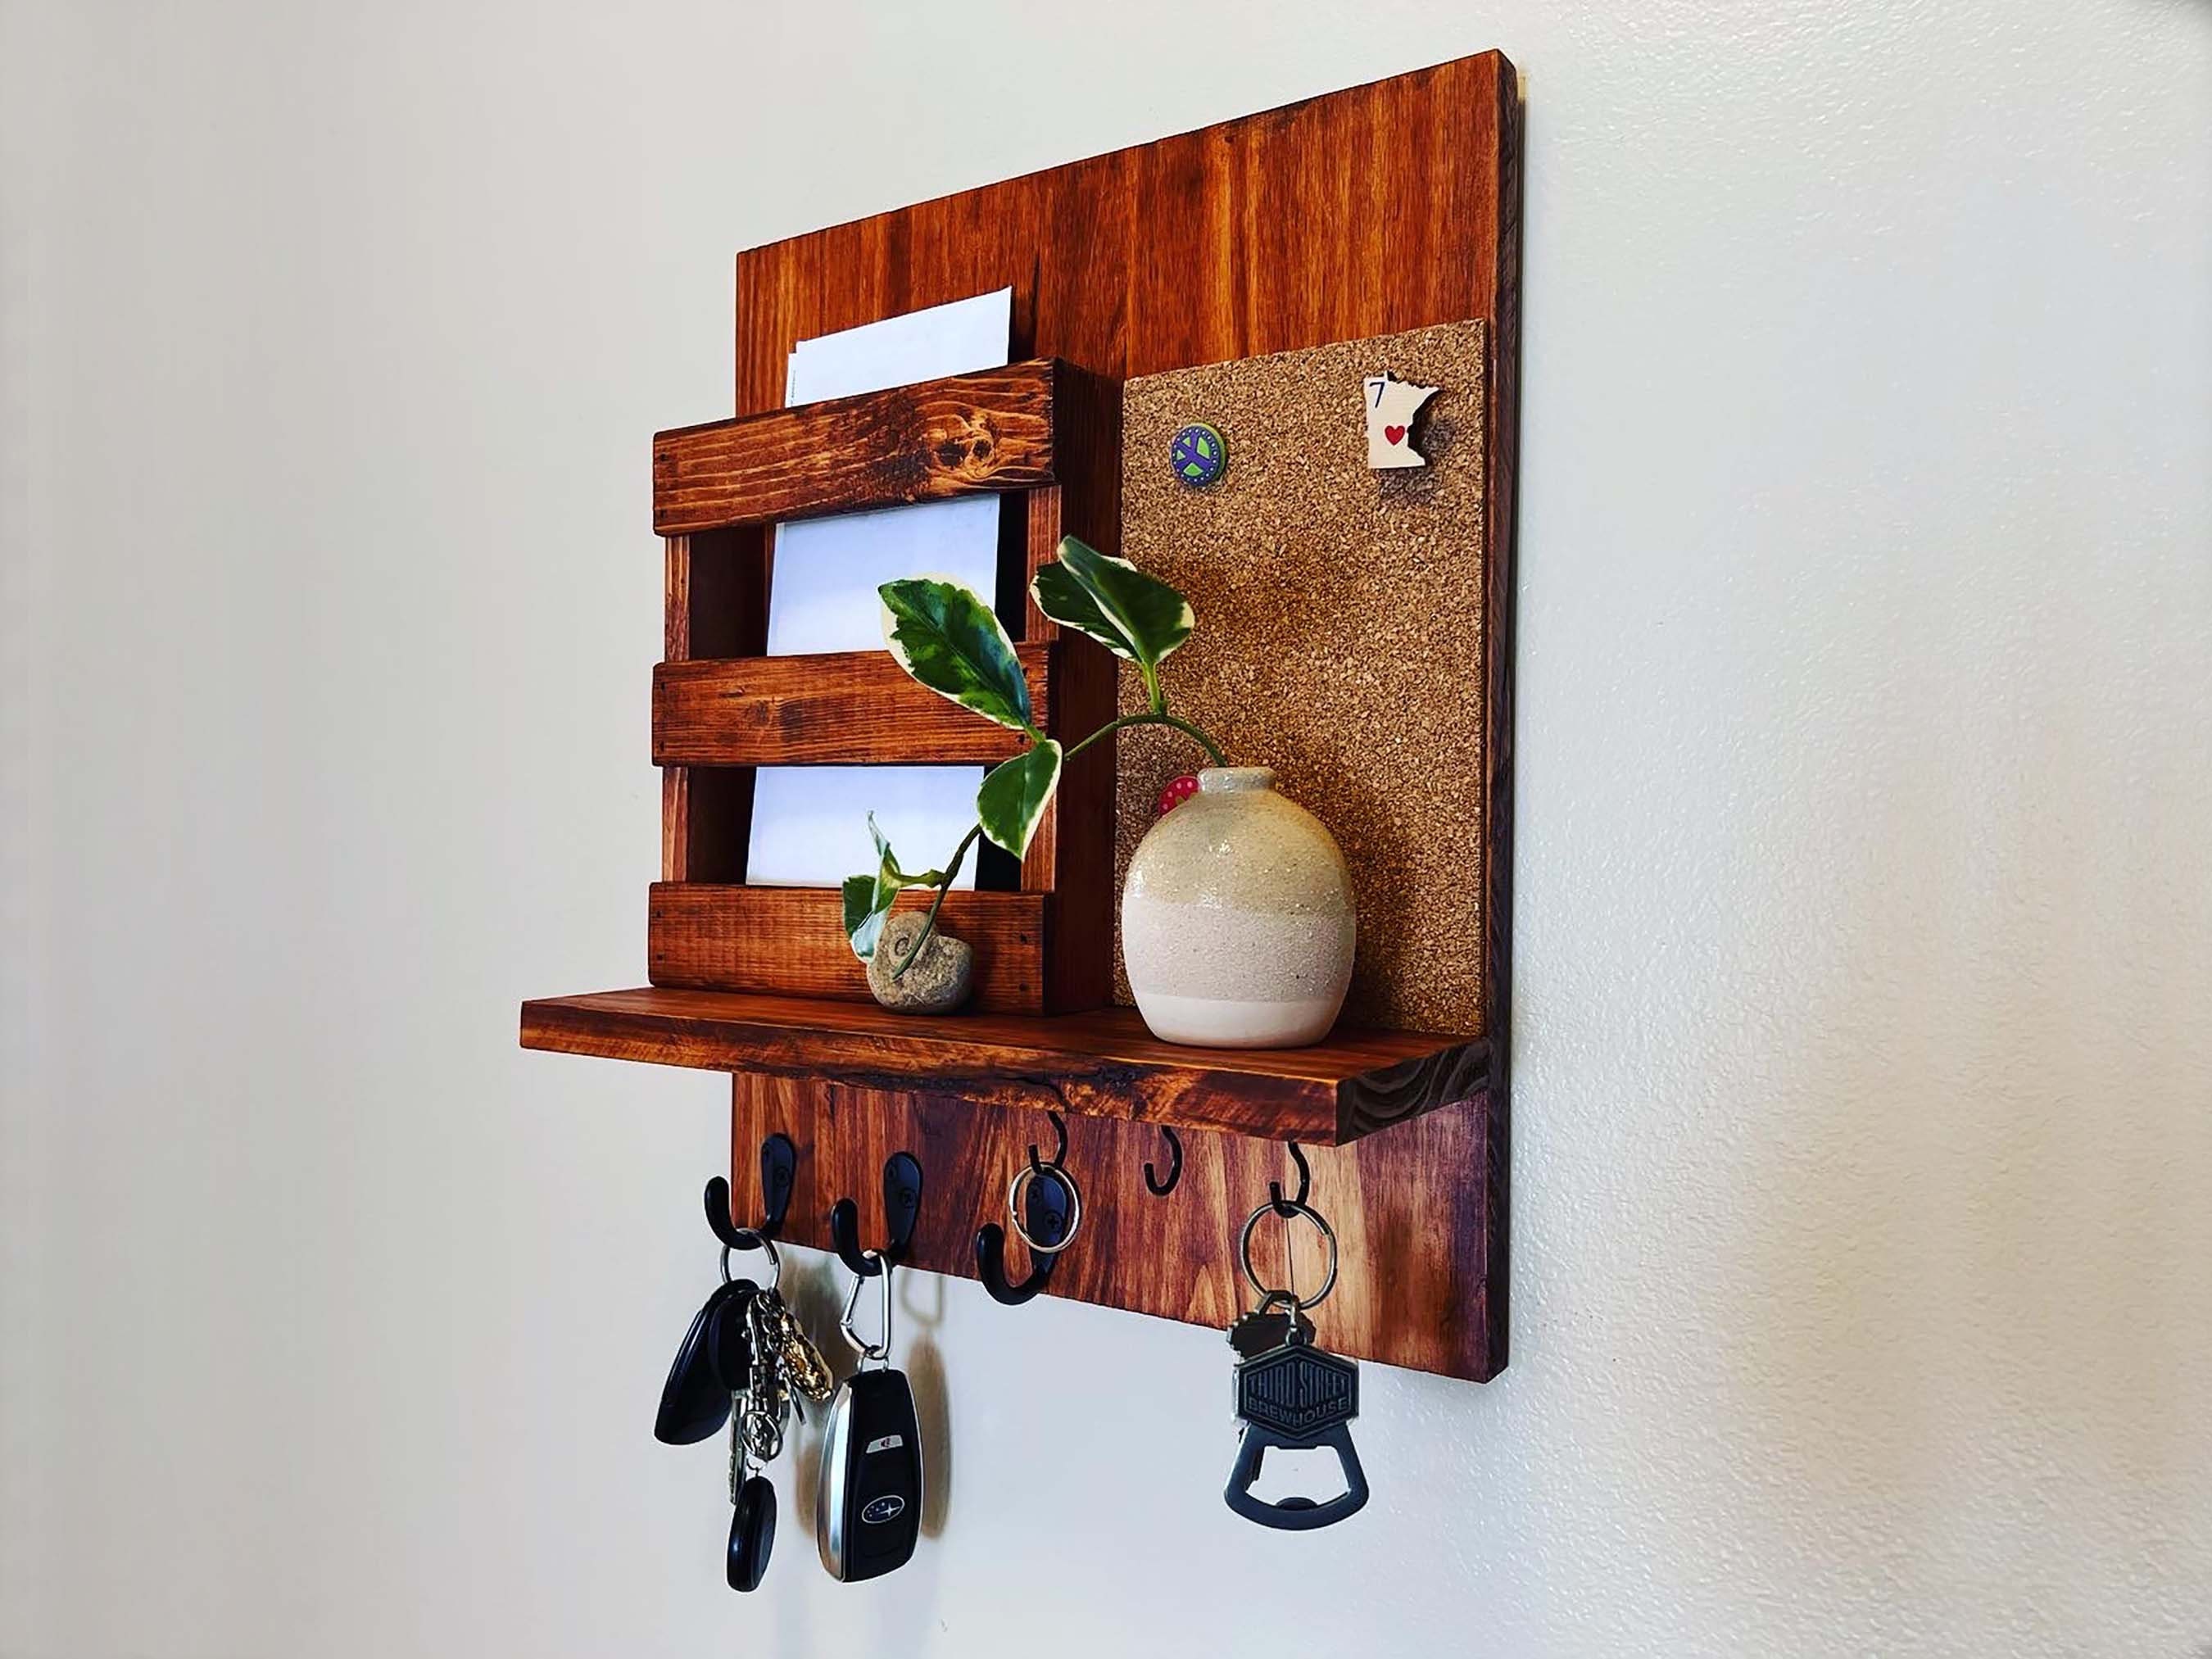 Wooden Key Holder for Wall Decorative Mail and Key Holder Organizer with 4  Key Hooks and “Z” Shape Wall Mount Floating Shelf,Rustic Home Decor for